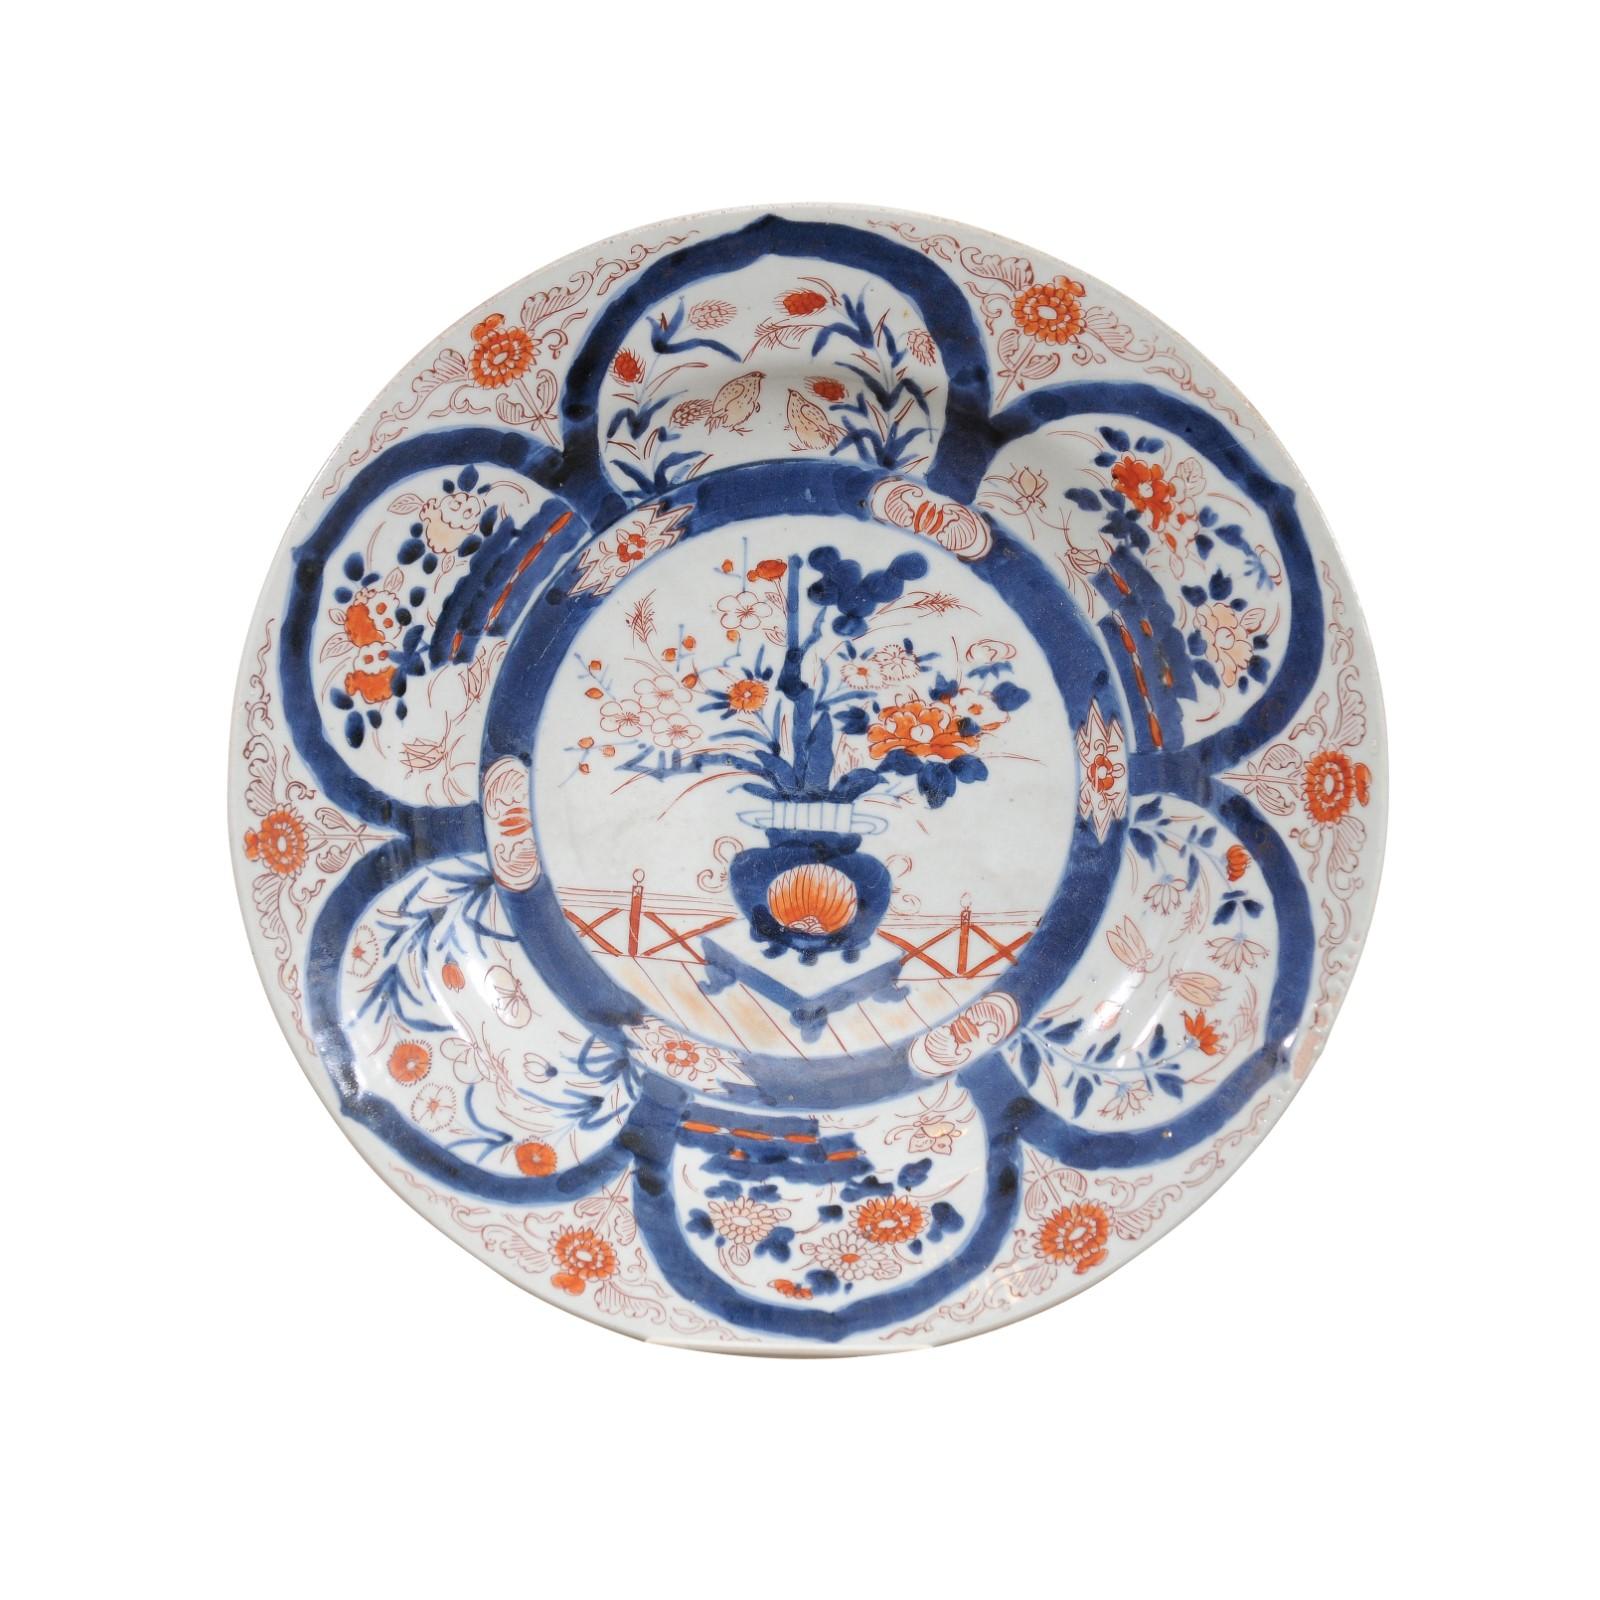 Large 18th Century Chinese Export Imari Porcelain Charger In Good Condition For Sale In Atlanta, GA